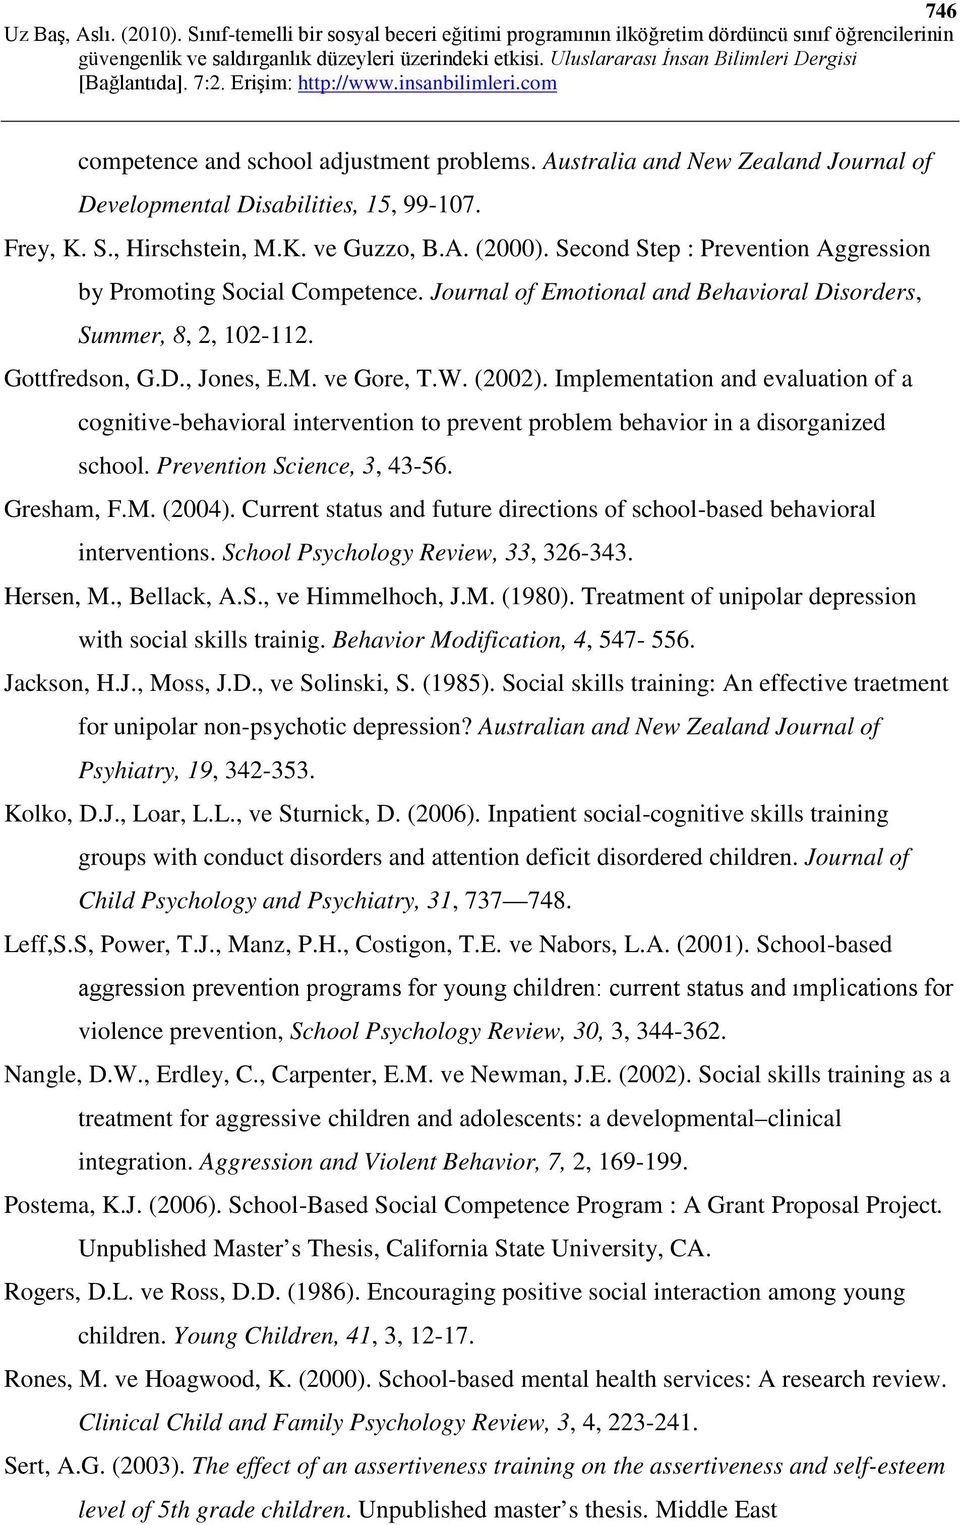 Implementation and evaluation of a cognitive-behavioral intervention to prevent problem behavior in a disorganized school. Prevention Science, 3, 43-56. Gresham, F.M. (2004).